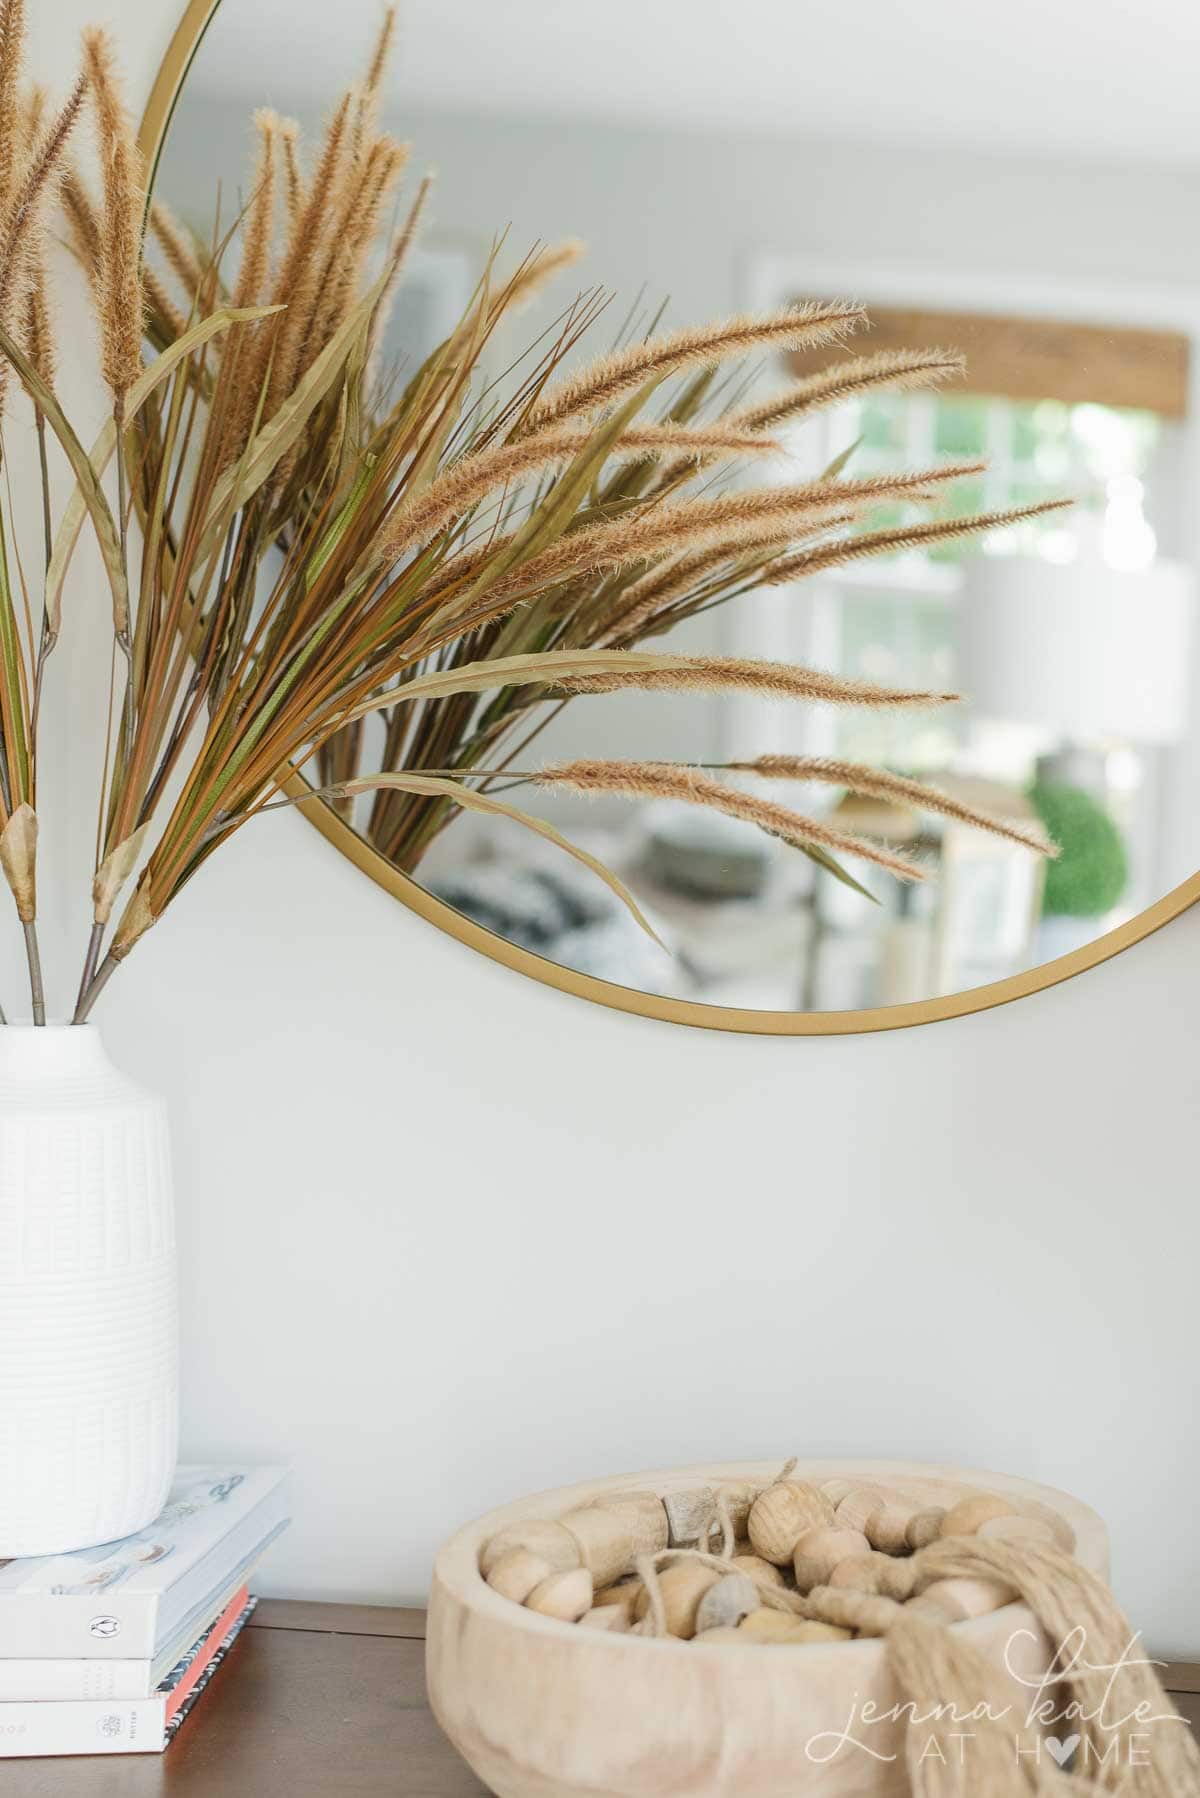 A minimalist approach to decorating for fall using grasses or branches